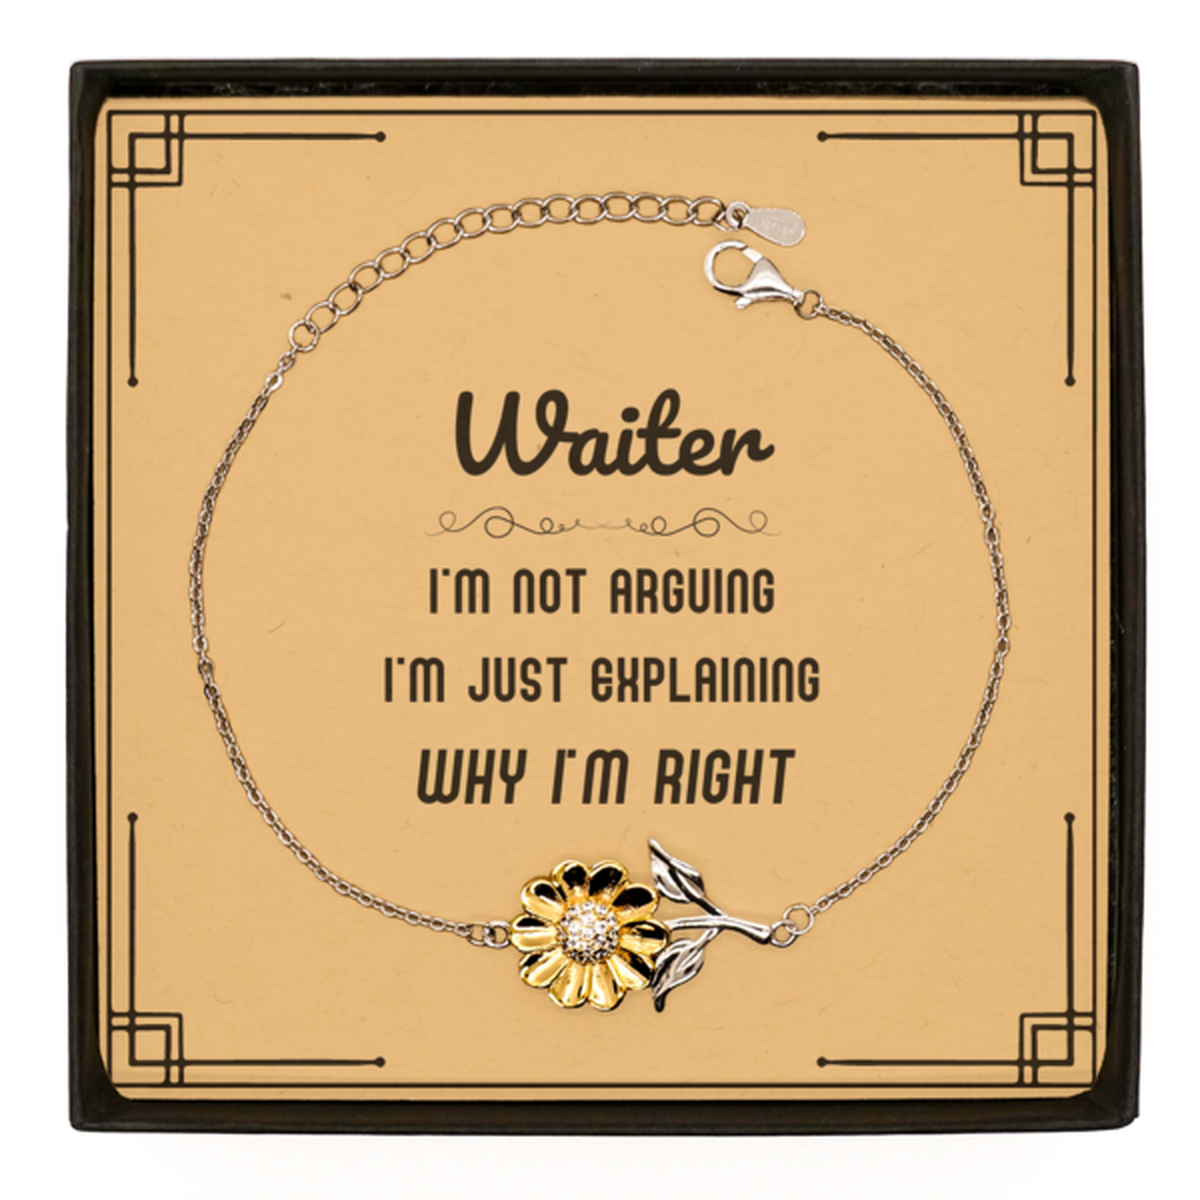 Waiter I'm not Arguing. I'm Just Explaining Why I'm RIGHT Sunflower Bracelet, Funny Saying Quote Waiter Gifts For Waiter Message Card Graduation Birthday Christmas Gifts for Men Women Coworker